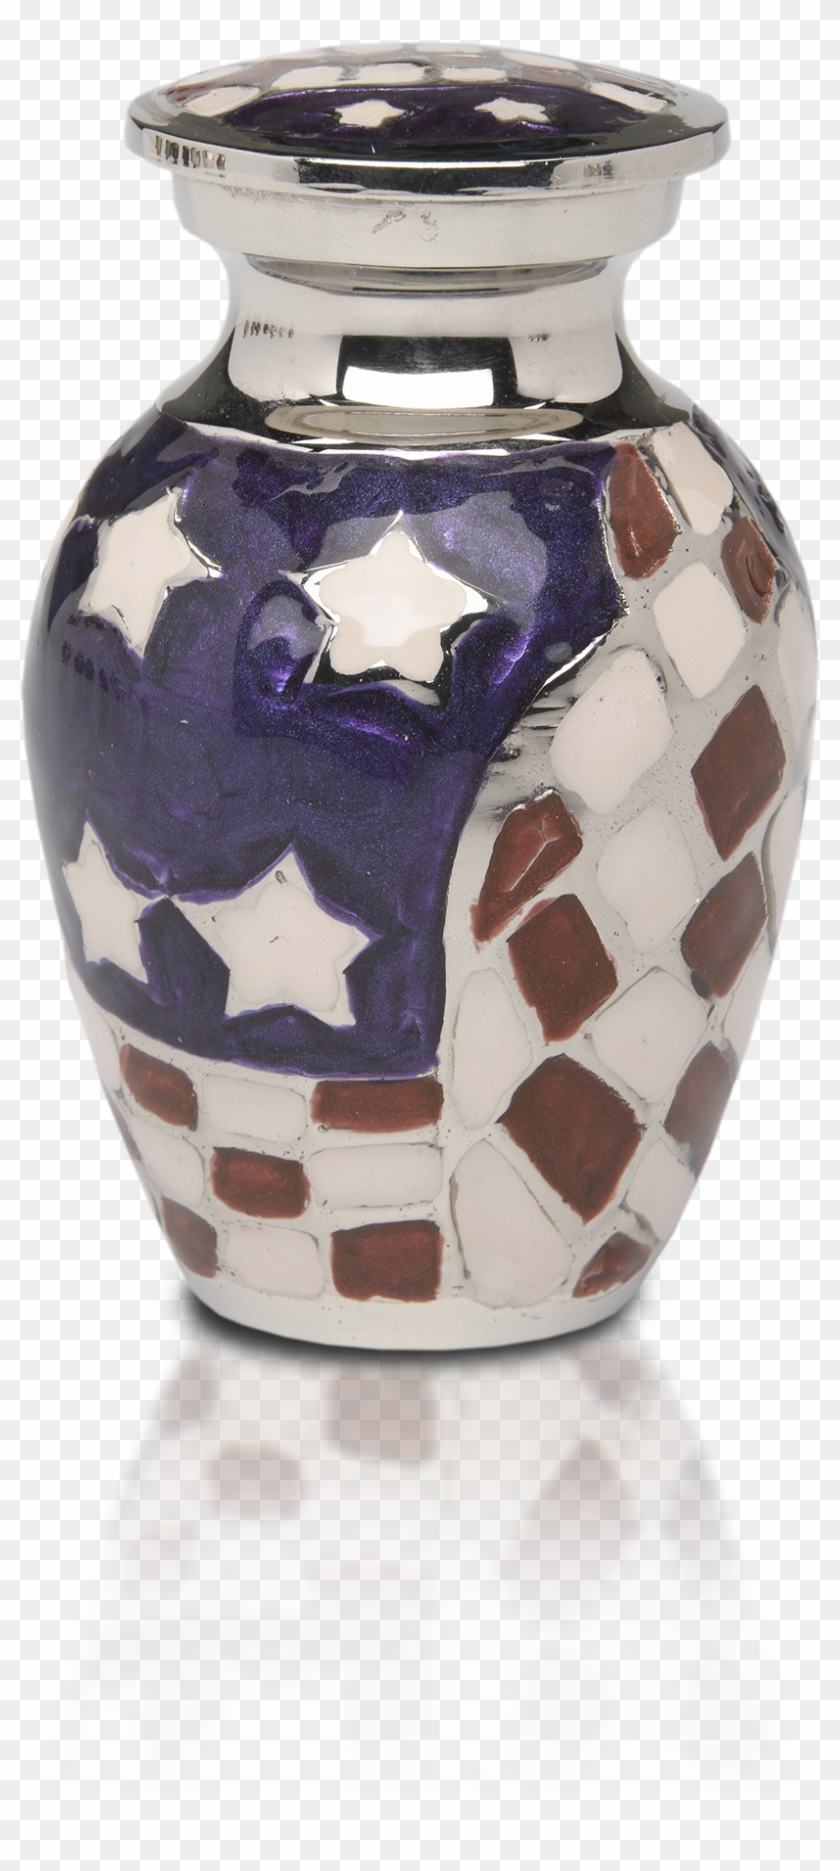 Patriotic Red, White & Blue American Flag Cremation - Vase Clipart #3026359